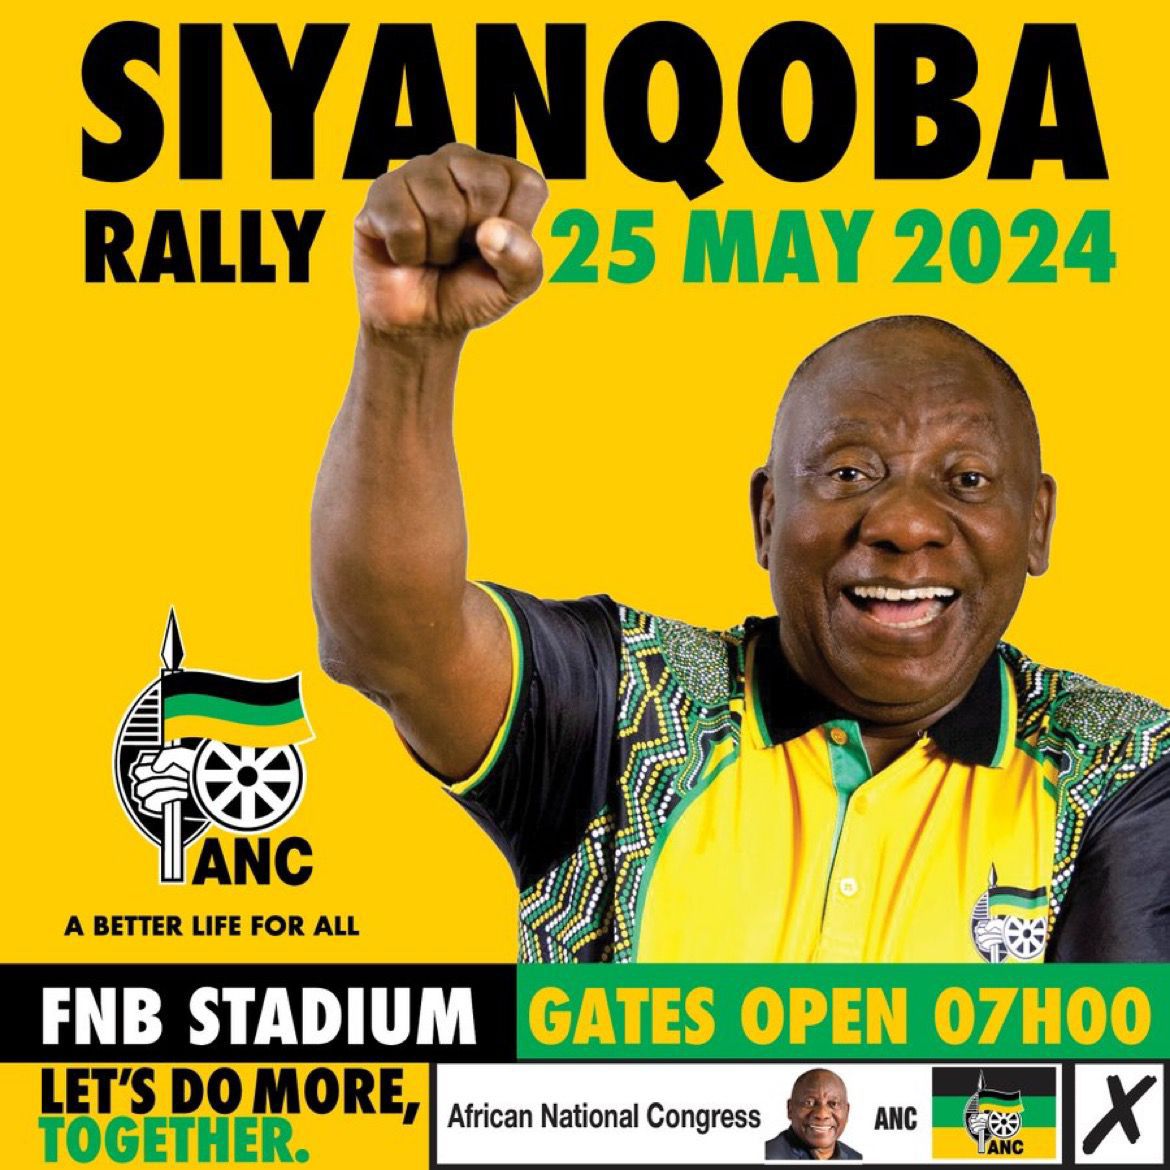 Ward 67 Jabulani Buthelezi branch in mamelodi Zone is going to the Mother of all Rallies at the FNB stadium 💛💚🖤
#siyanqobarally2024
#VoteANC2024
#letsdomoretogether